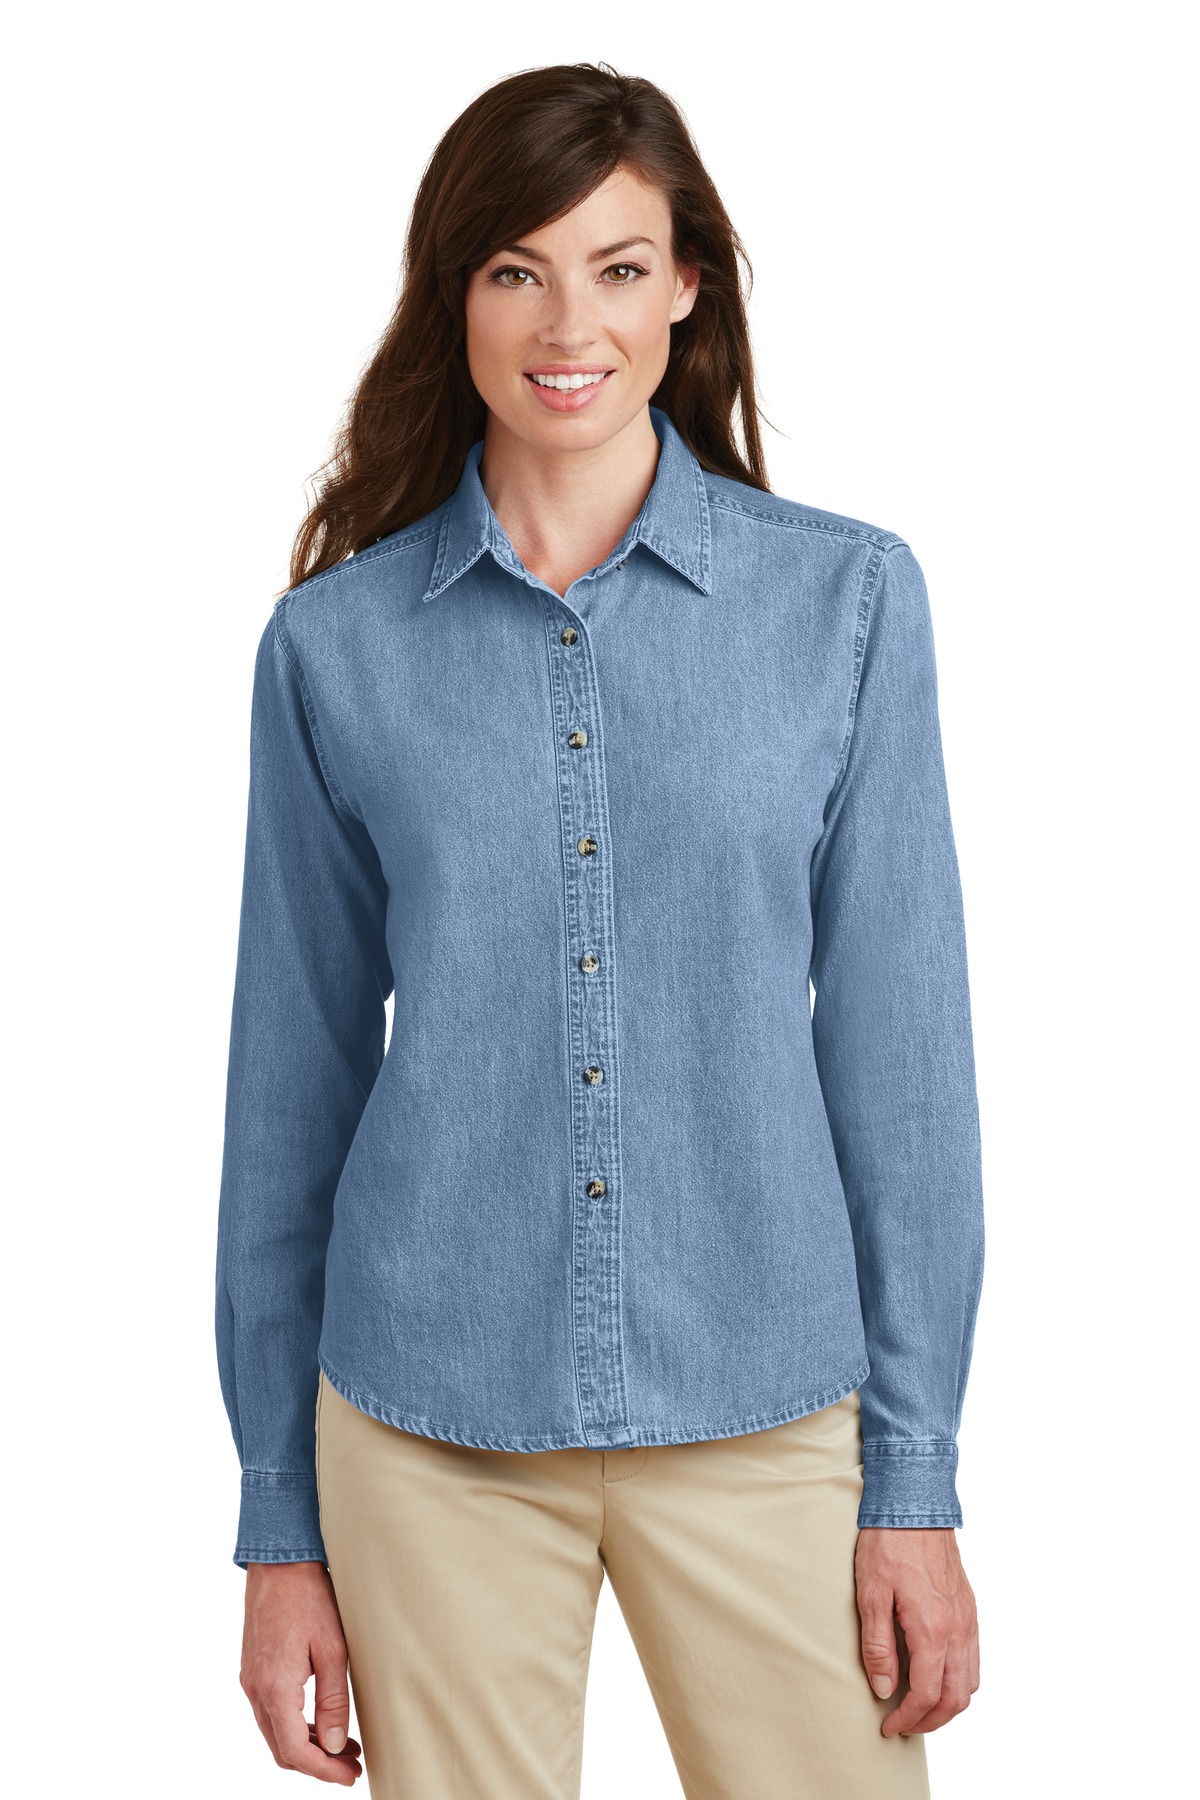 denim shirts with inner for women/shirt and top/shirt and top for women/ women shirts